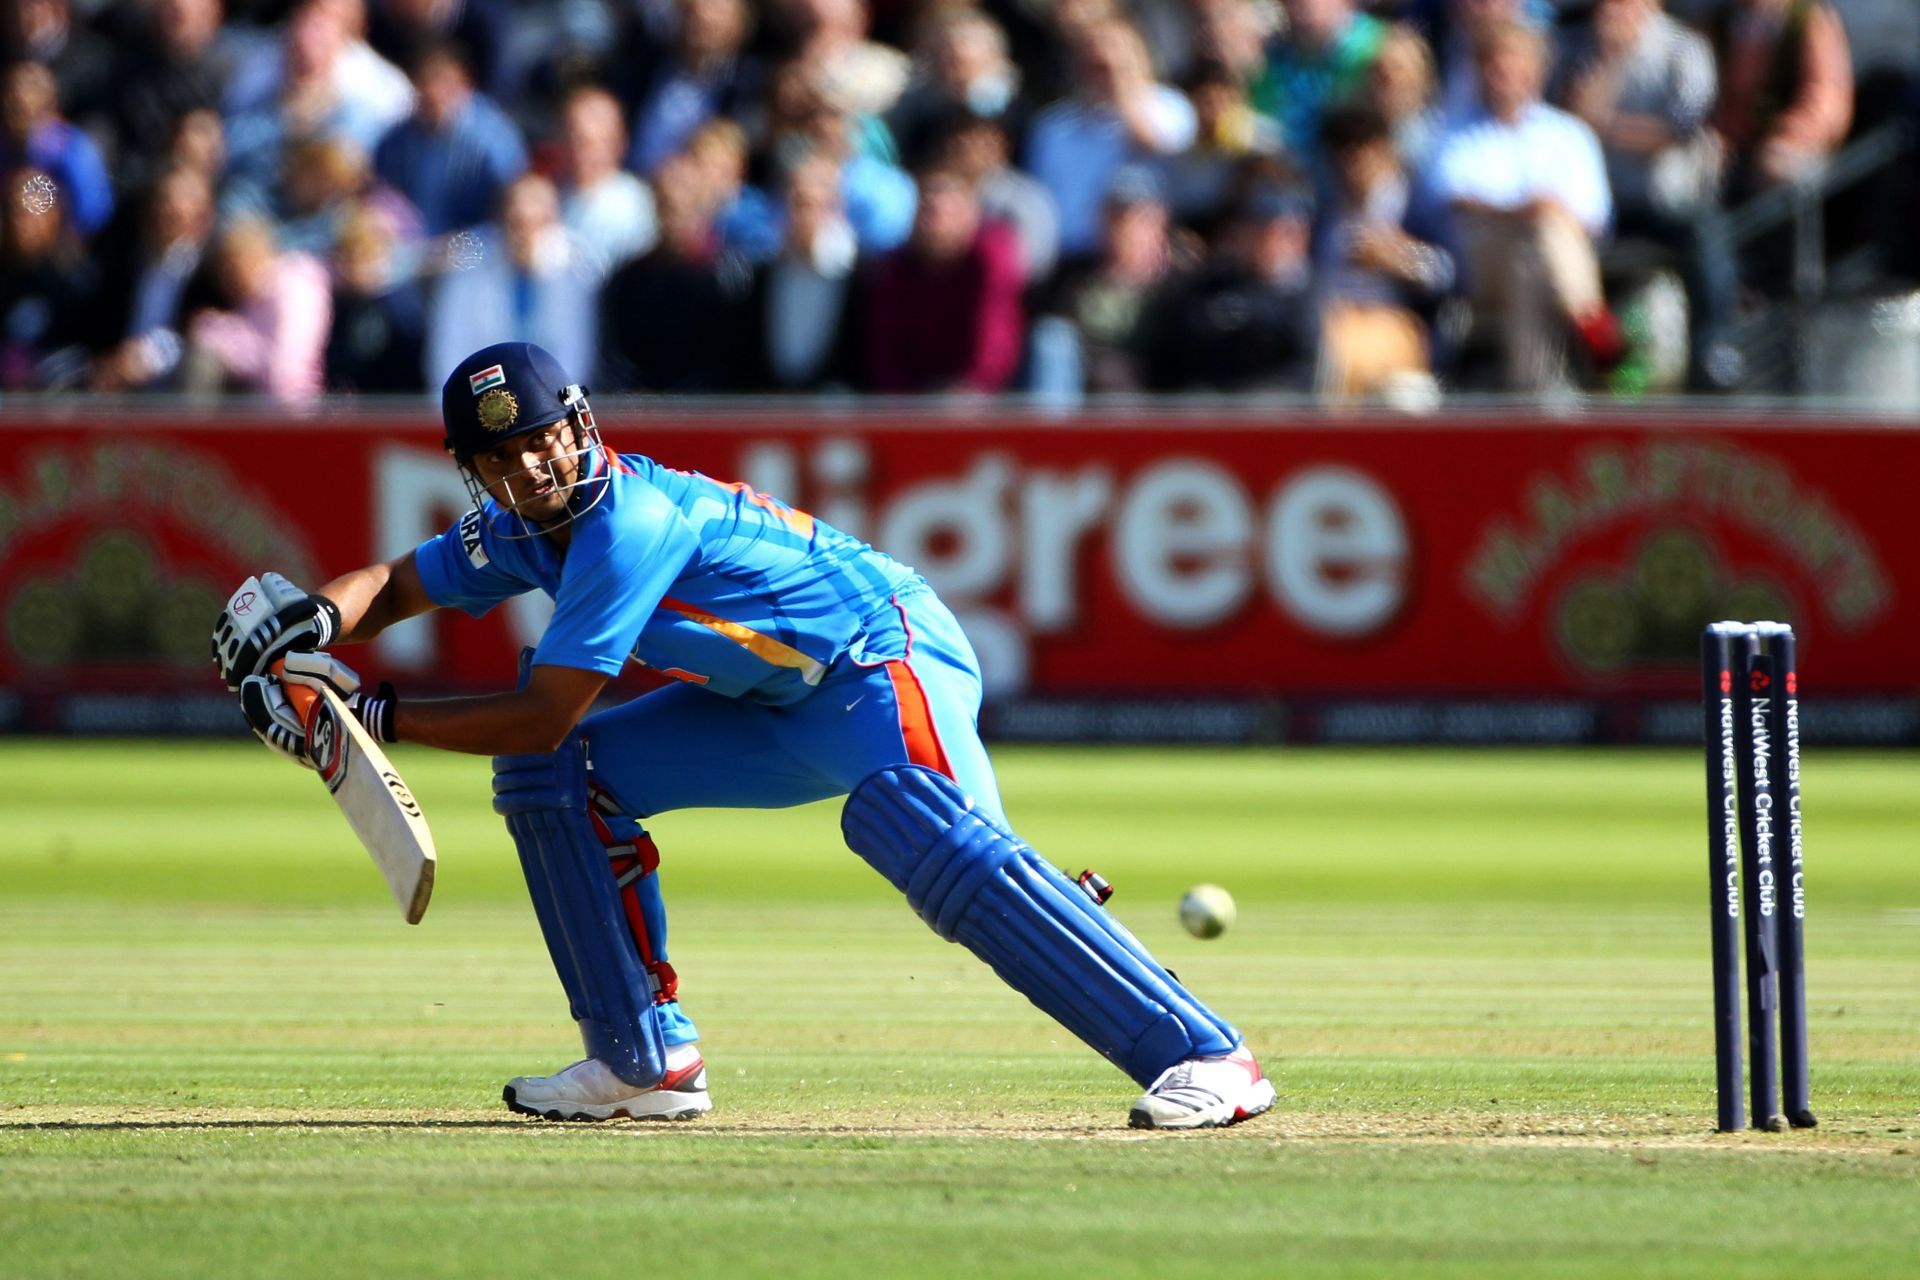 Suresh Raina was the first Indian to register centuries in all three formats